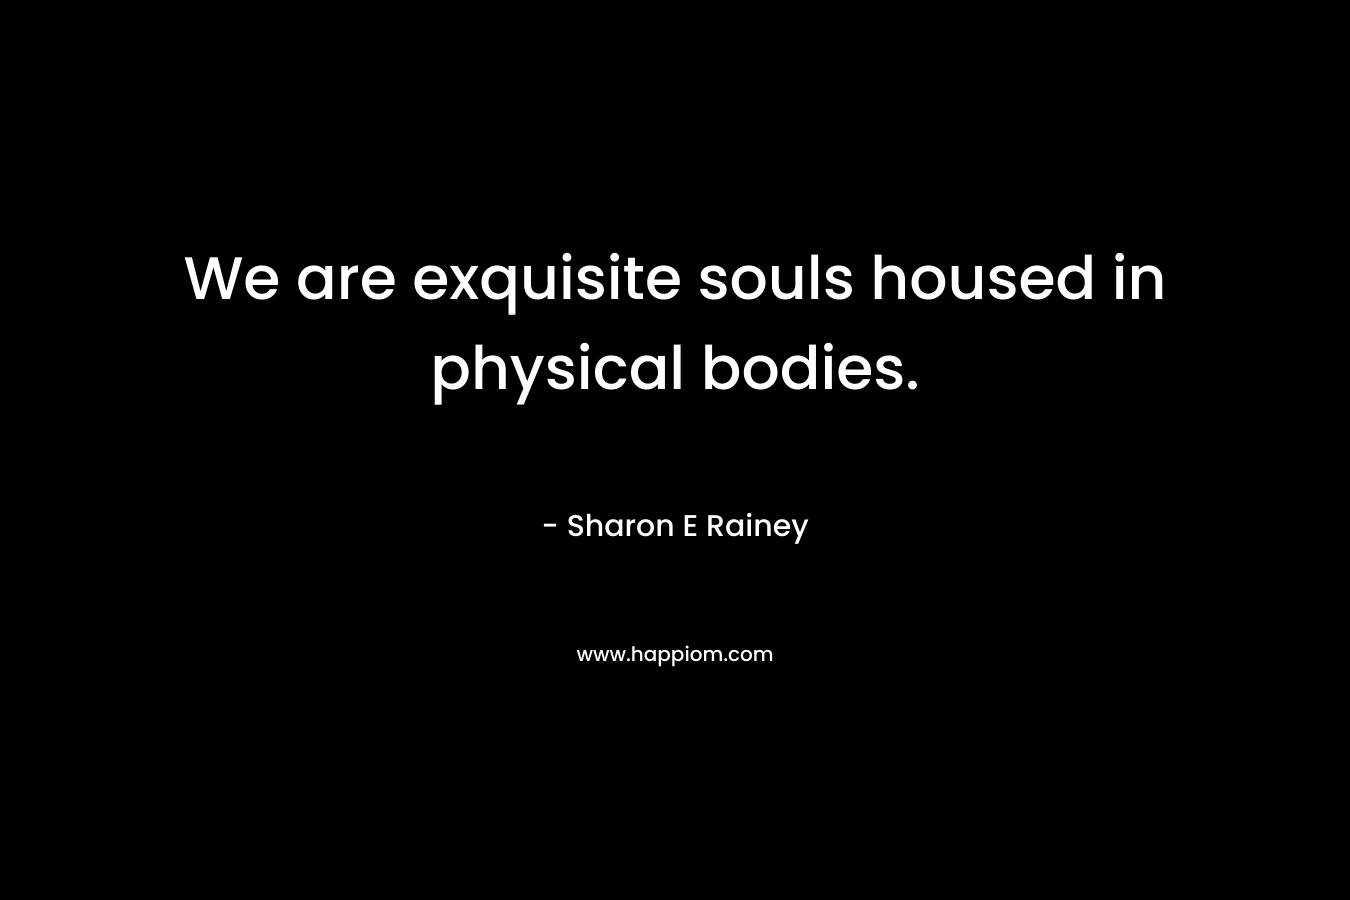 We are exquisite souls housed in physical bodies. – Sharon E Rainey